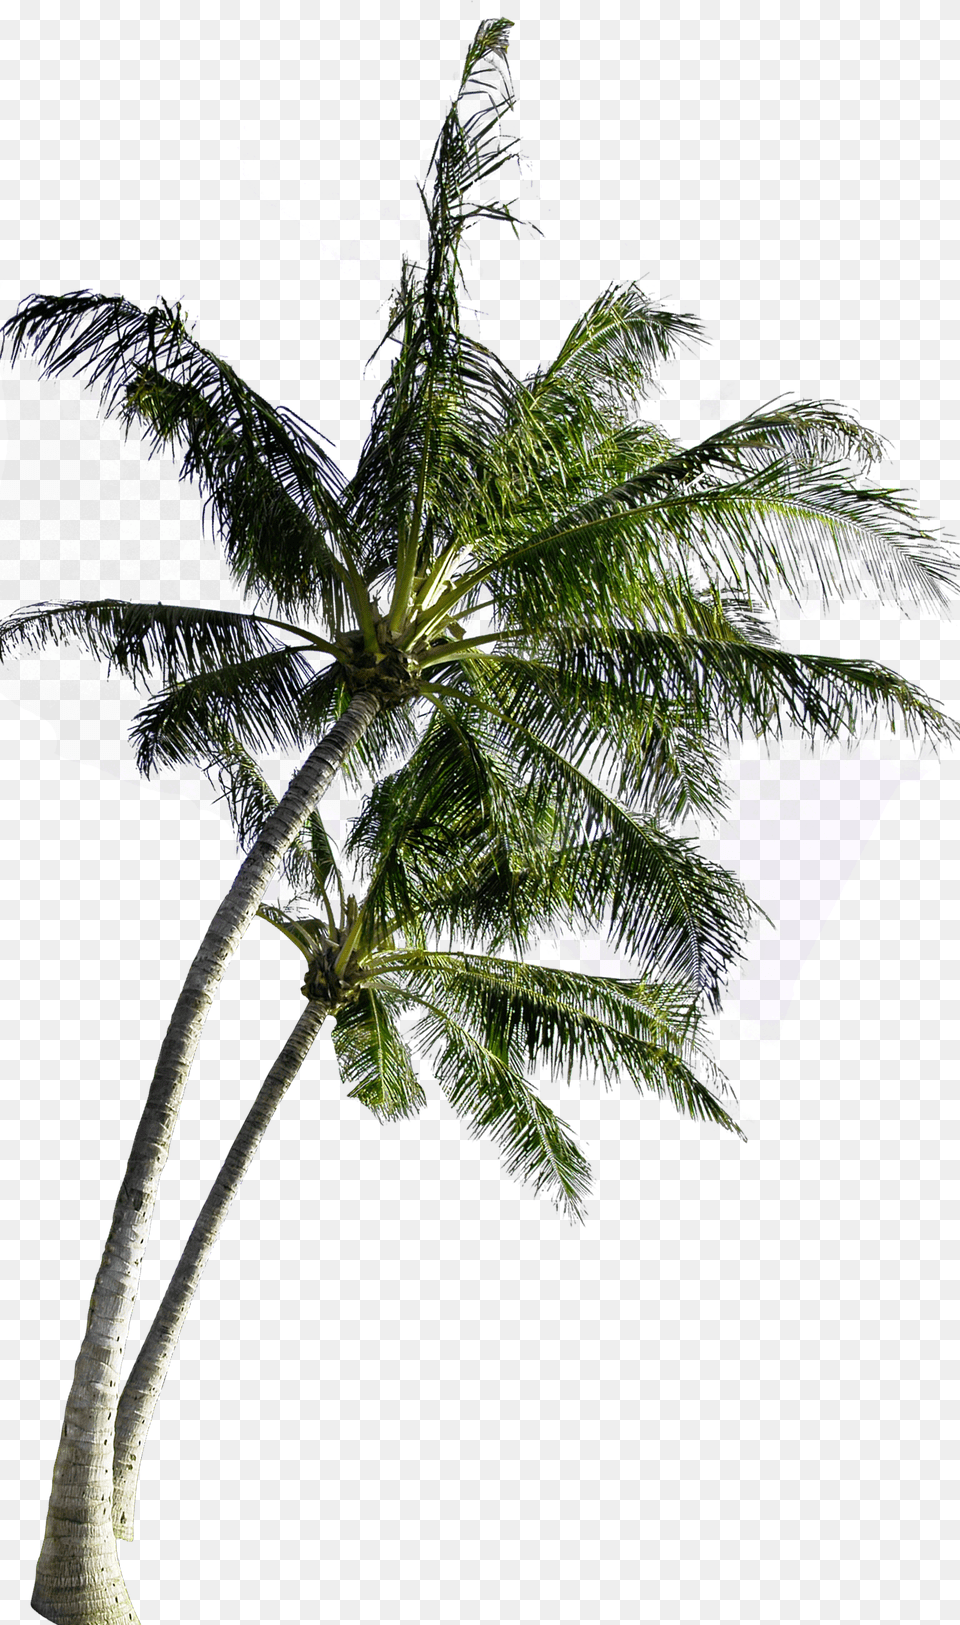 Coconut Computer Tree File Transparent Hd Coconut Tree Palm Tree, Plant, Leaf Free Png Download